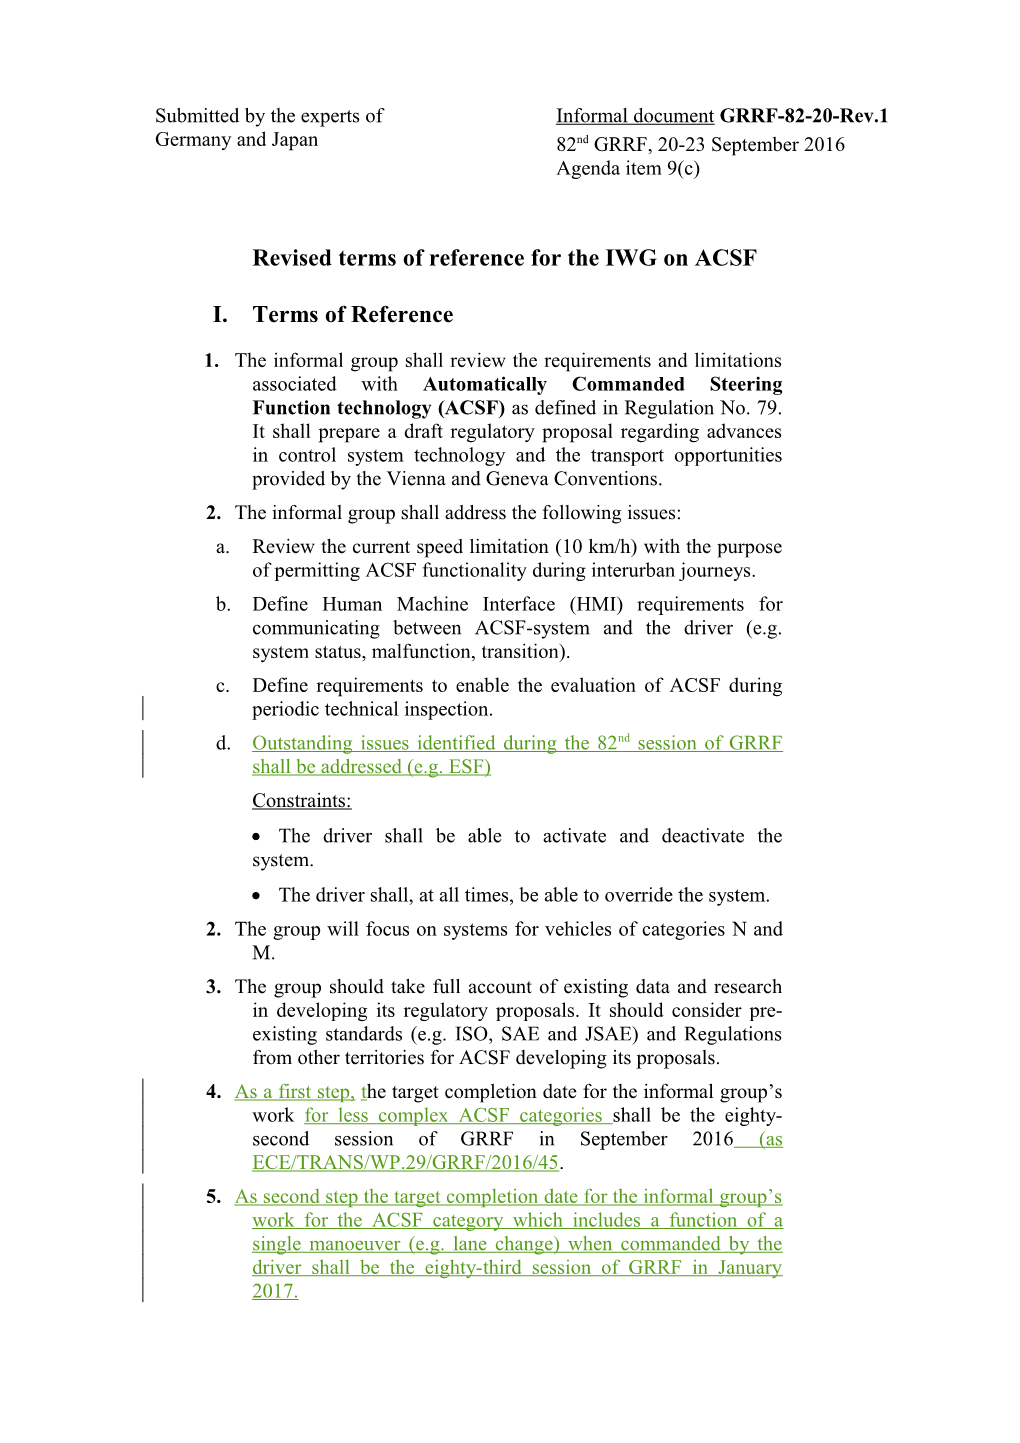 Revised Terms of Reference for the IWG on ACSF